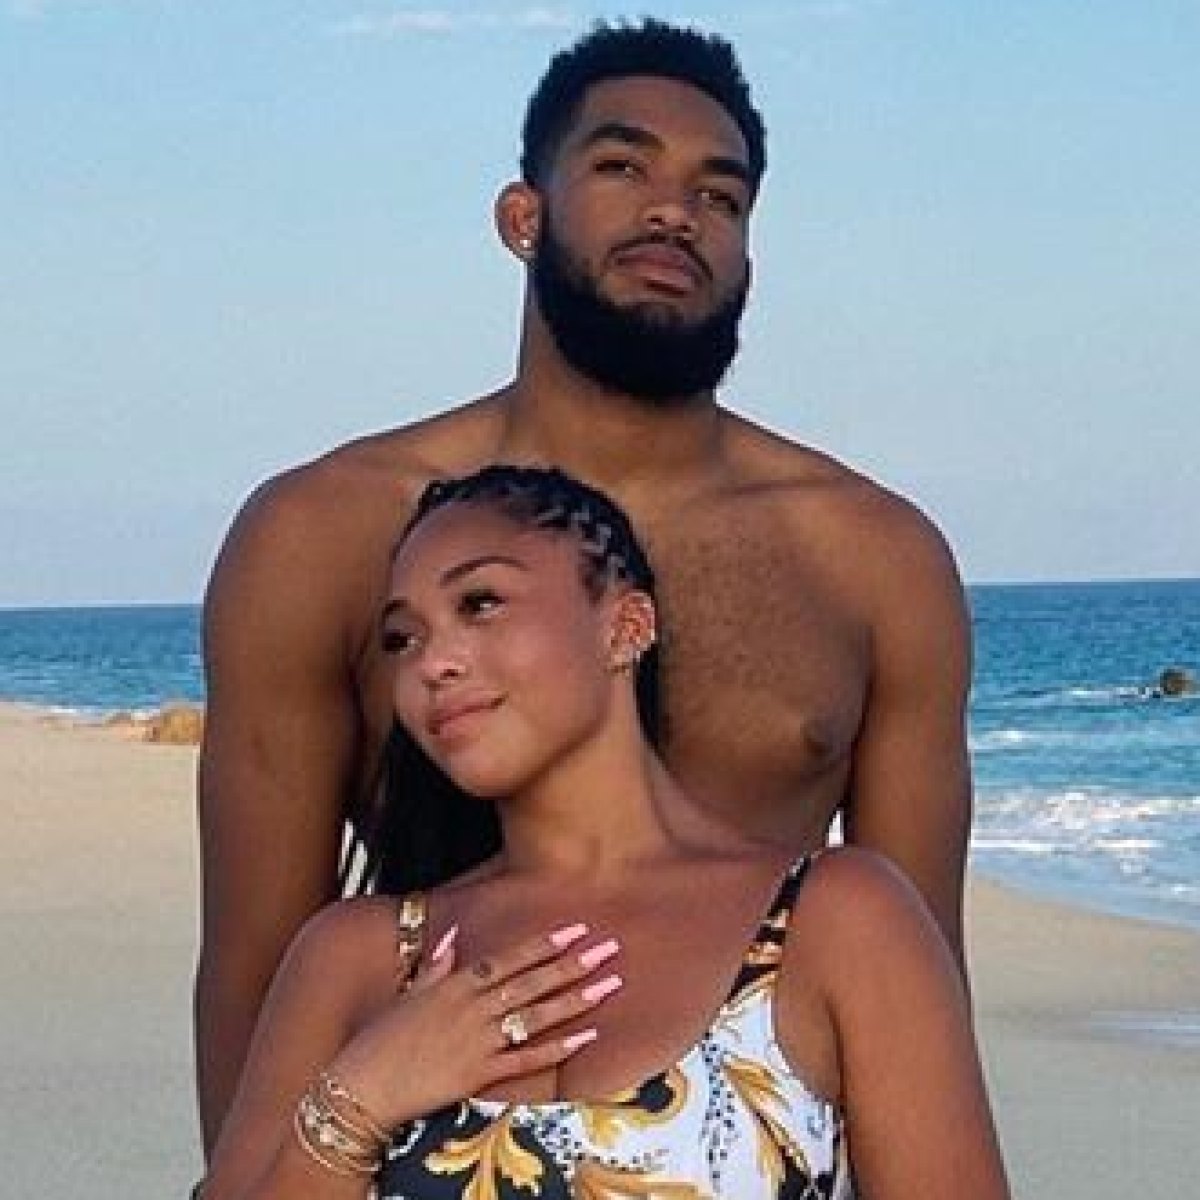 Black Nude Beach Sex Couples - Jordyn Woods, New BF Karl-Anthony Towns Go IG Official: Photos